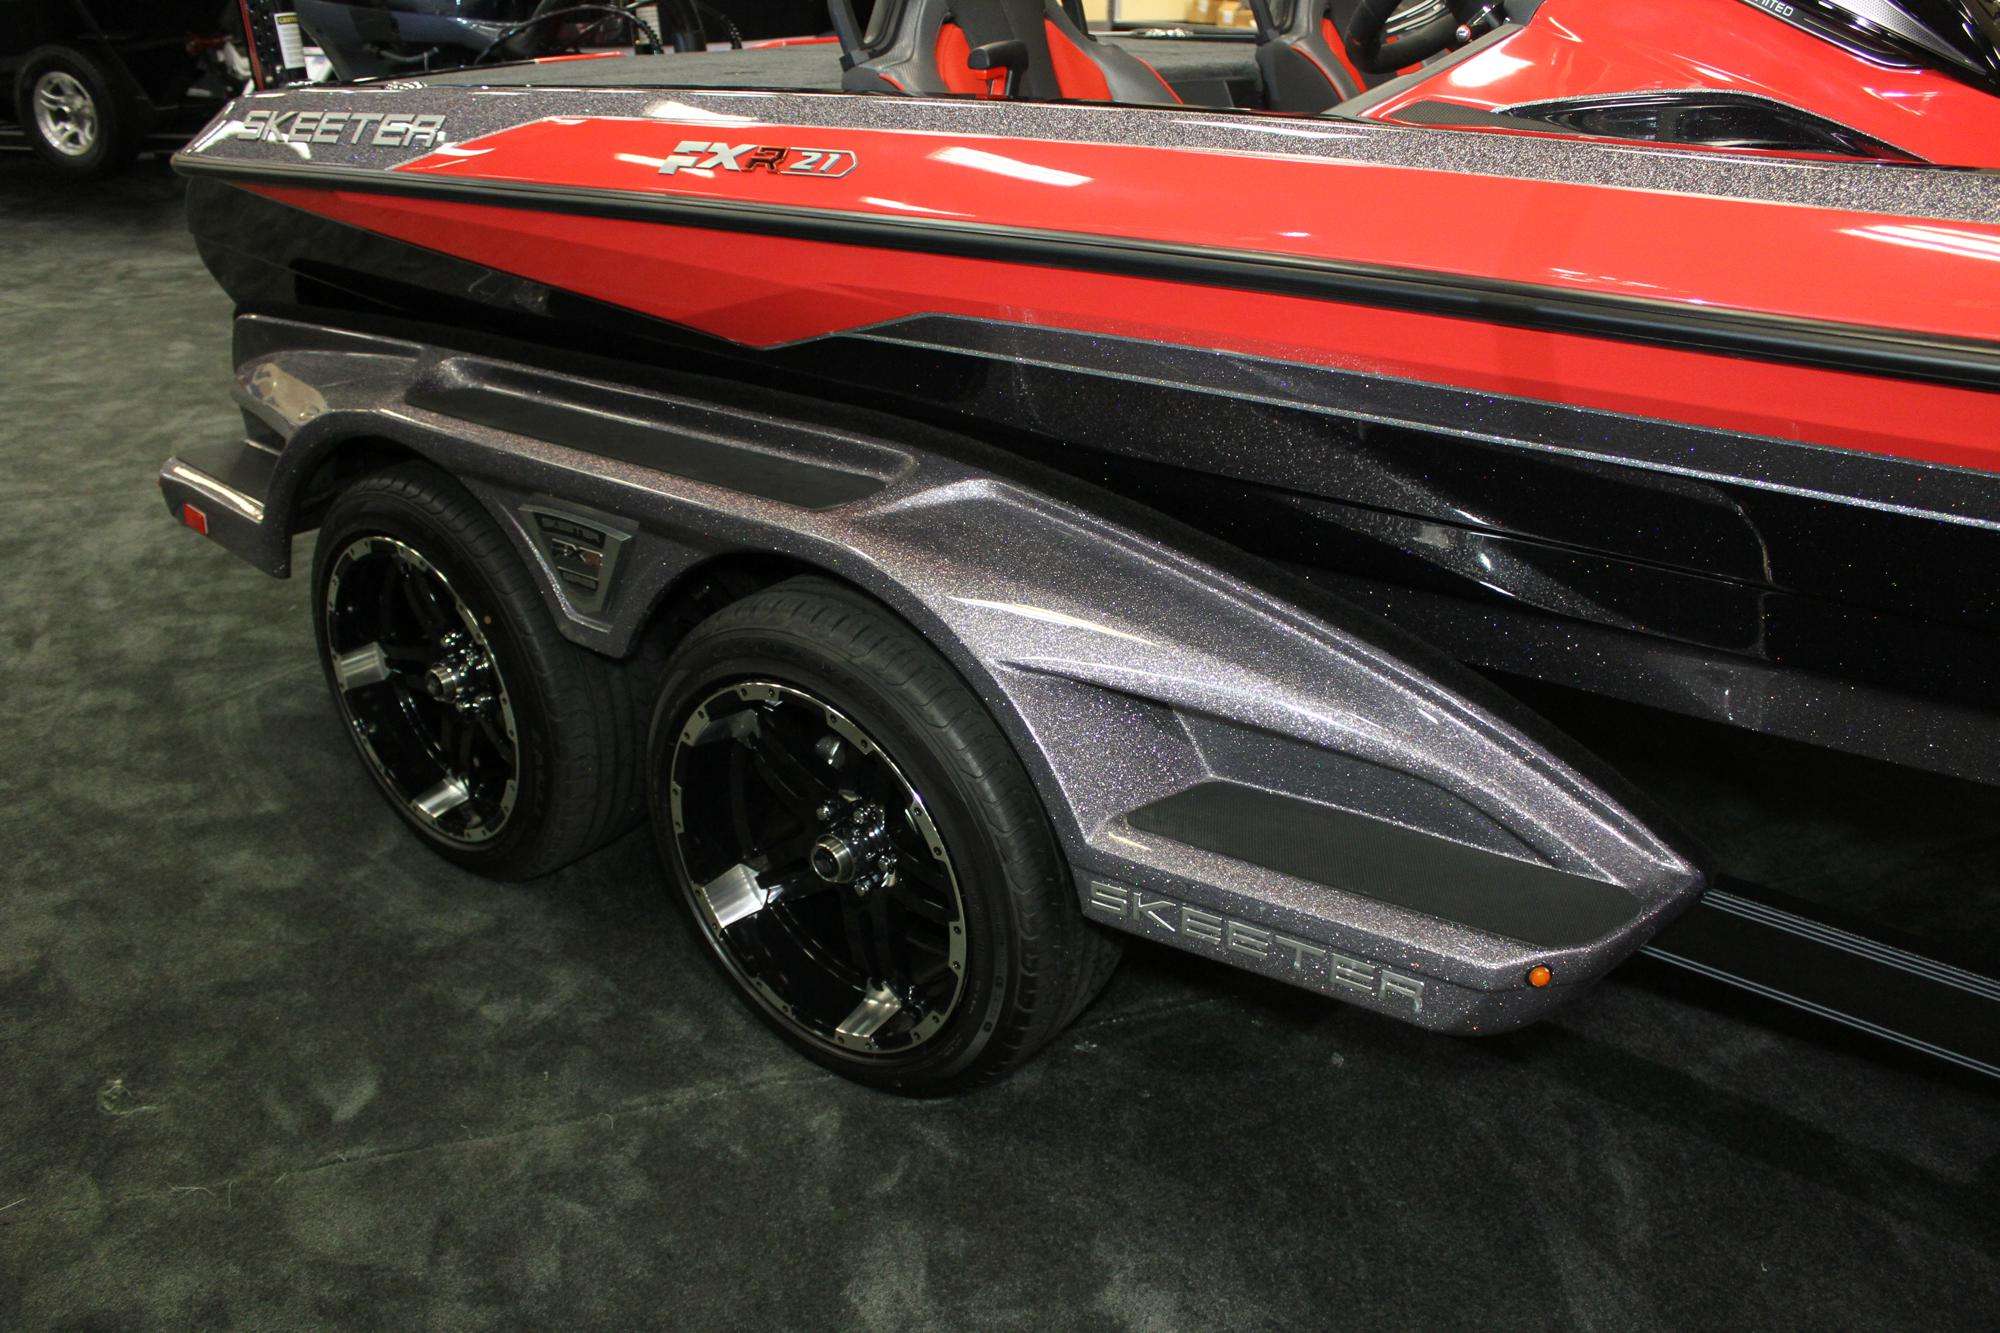 The fenders and 18-inch custom wheels on the Skeeter Built trailer add to the look.